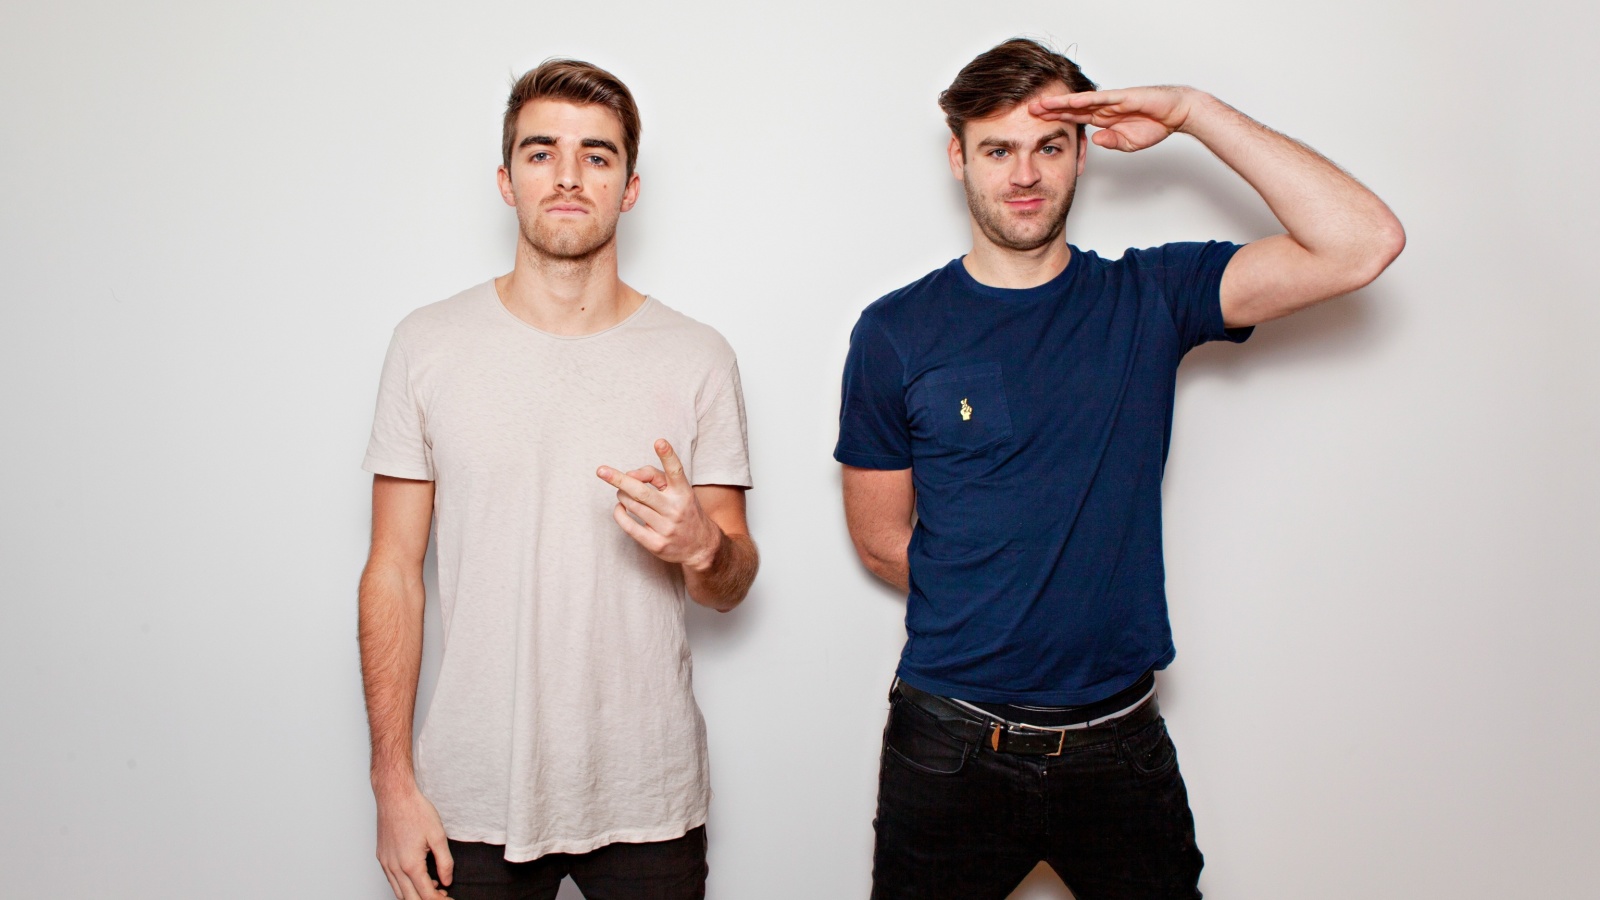 Das The Chainsmokers with Andrew Taggart and Alex Pall Wallpaper 1600x900